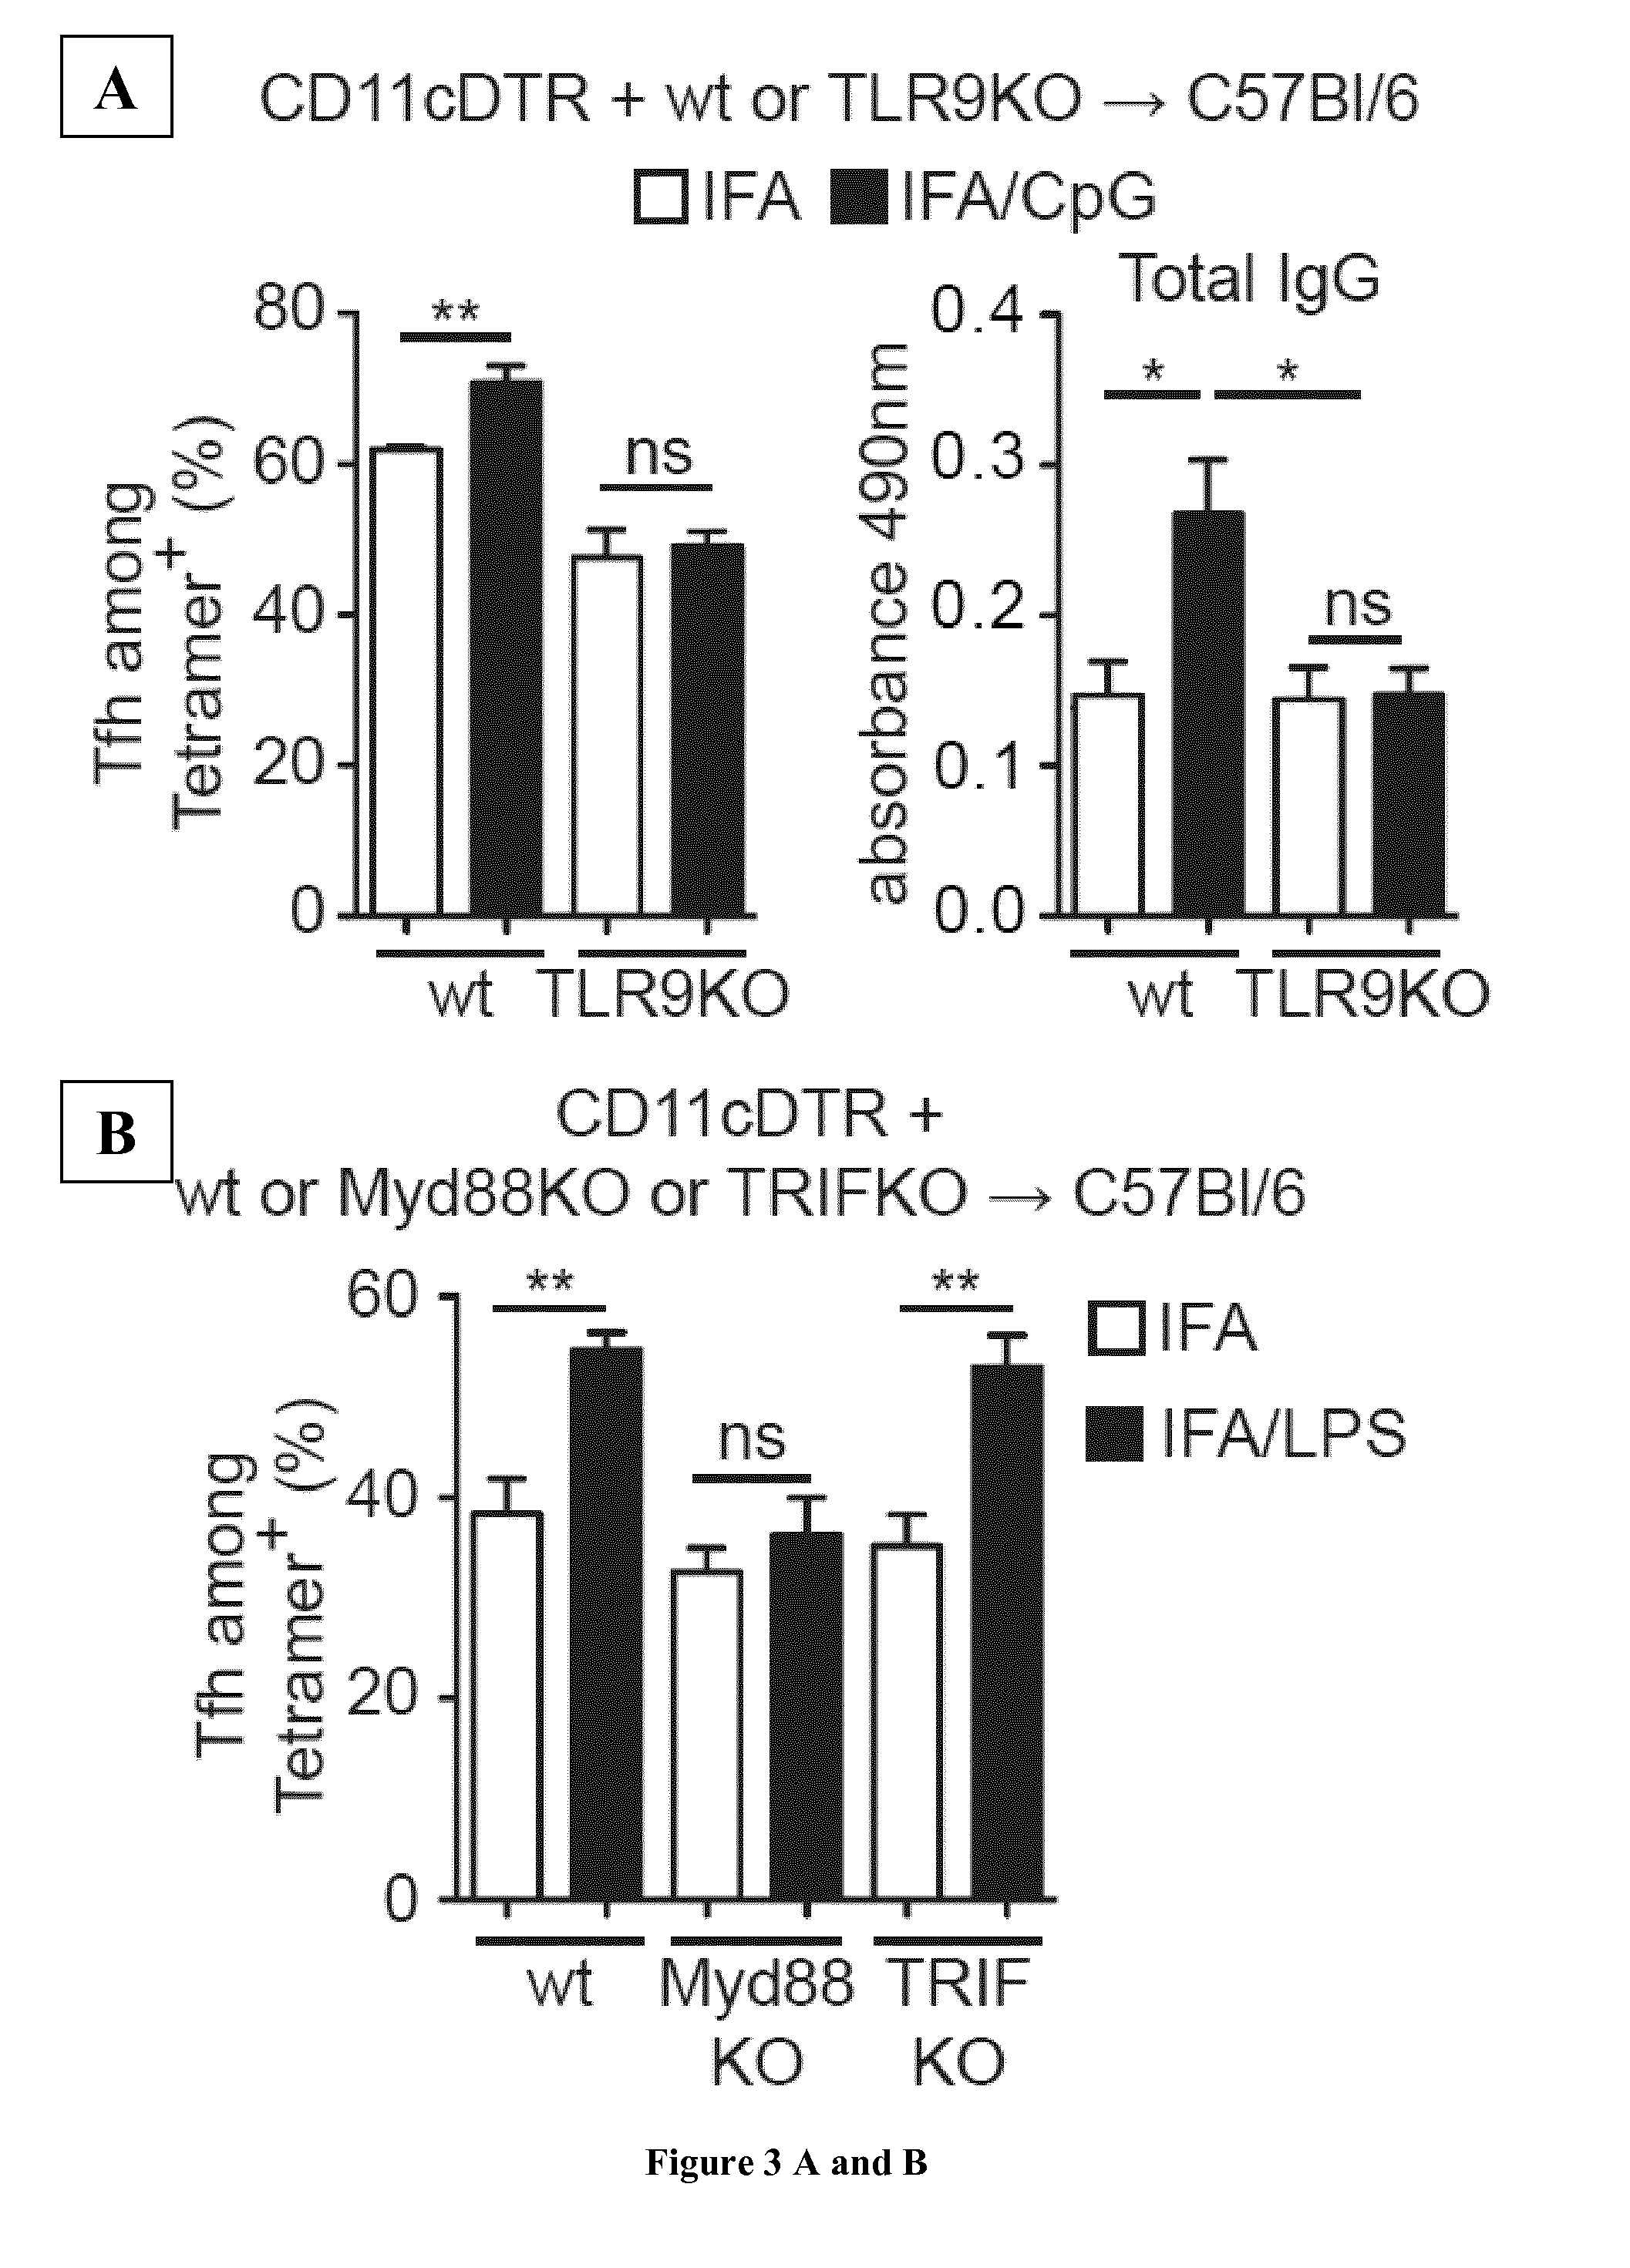 Immunoadjuvant Compositions and uses Thereof